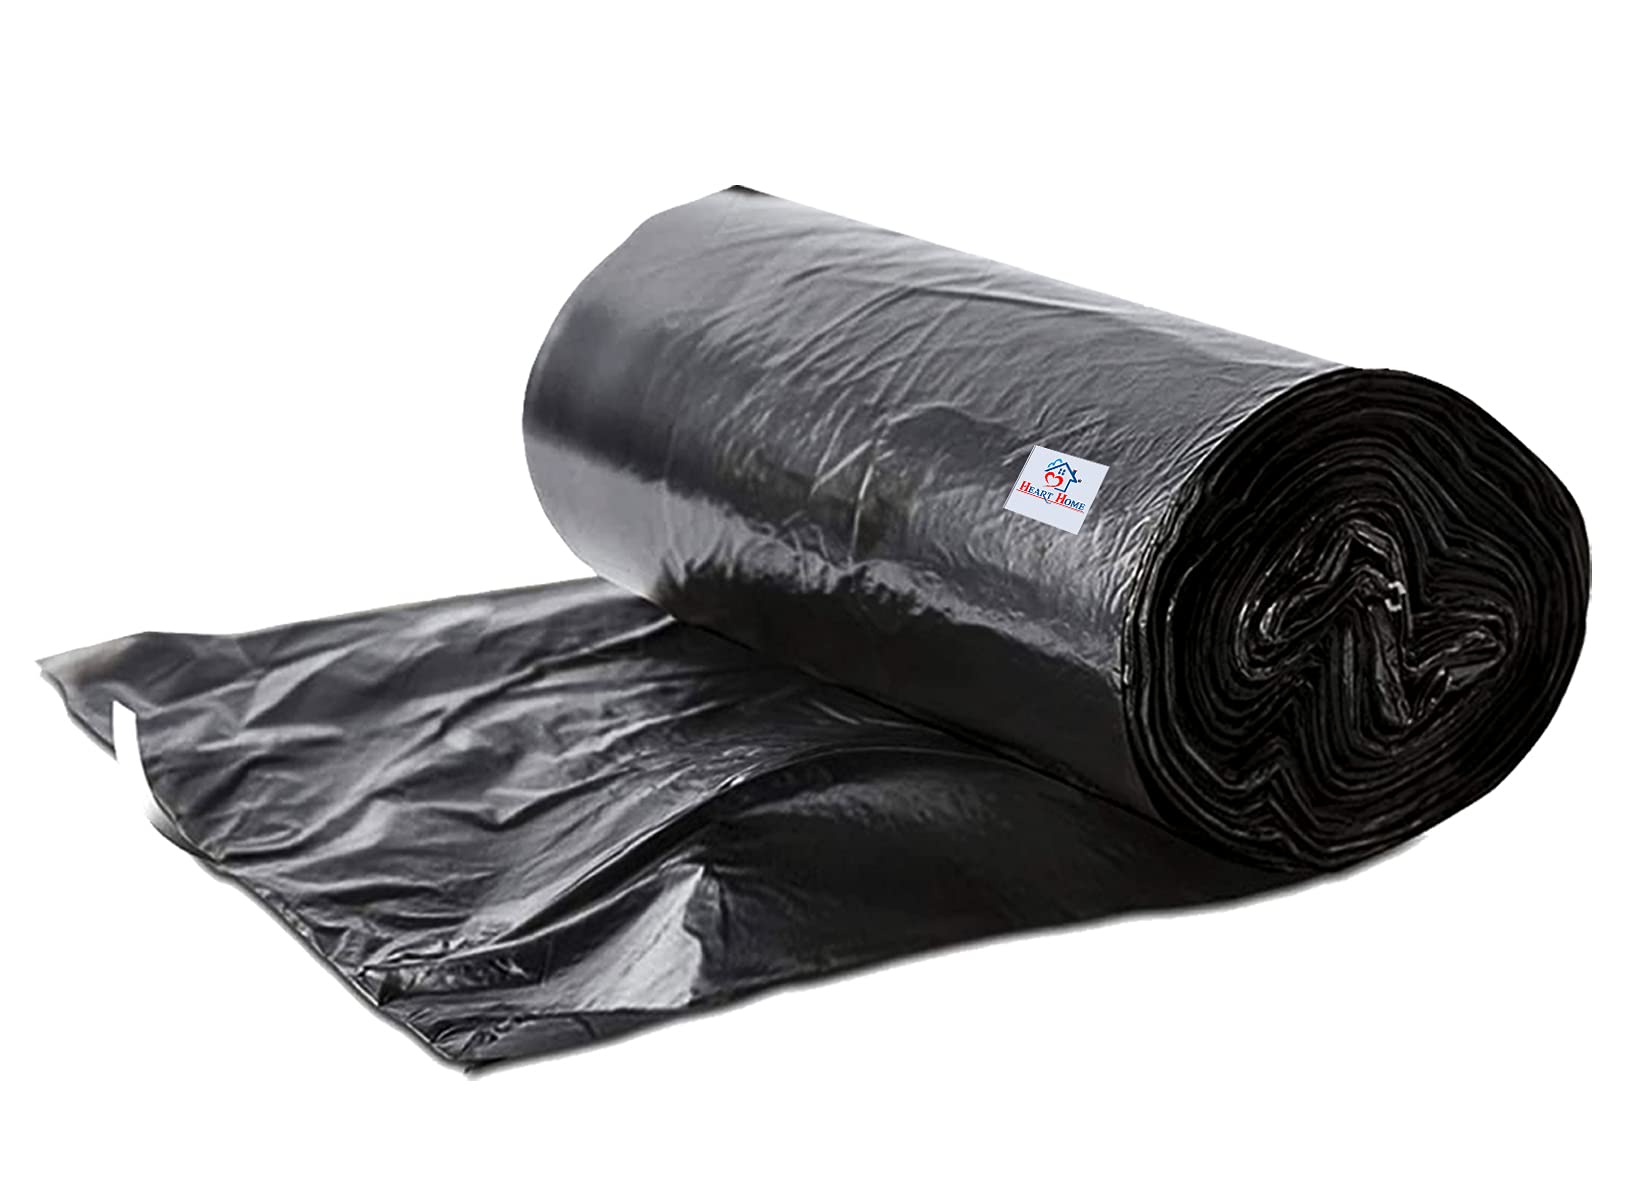 Garbage bag, dustbin bags, medium size, Trash Bags, 150 Bags 19x21 Inches.